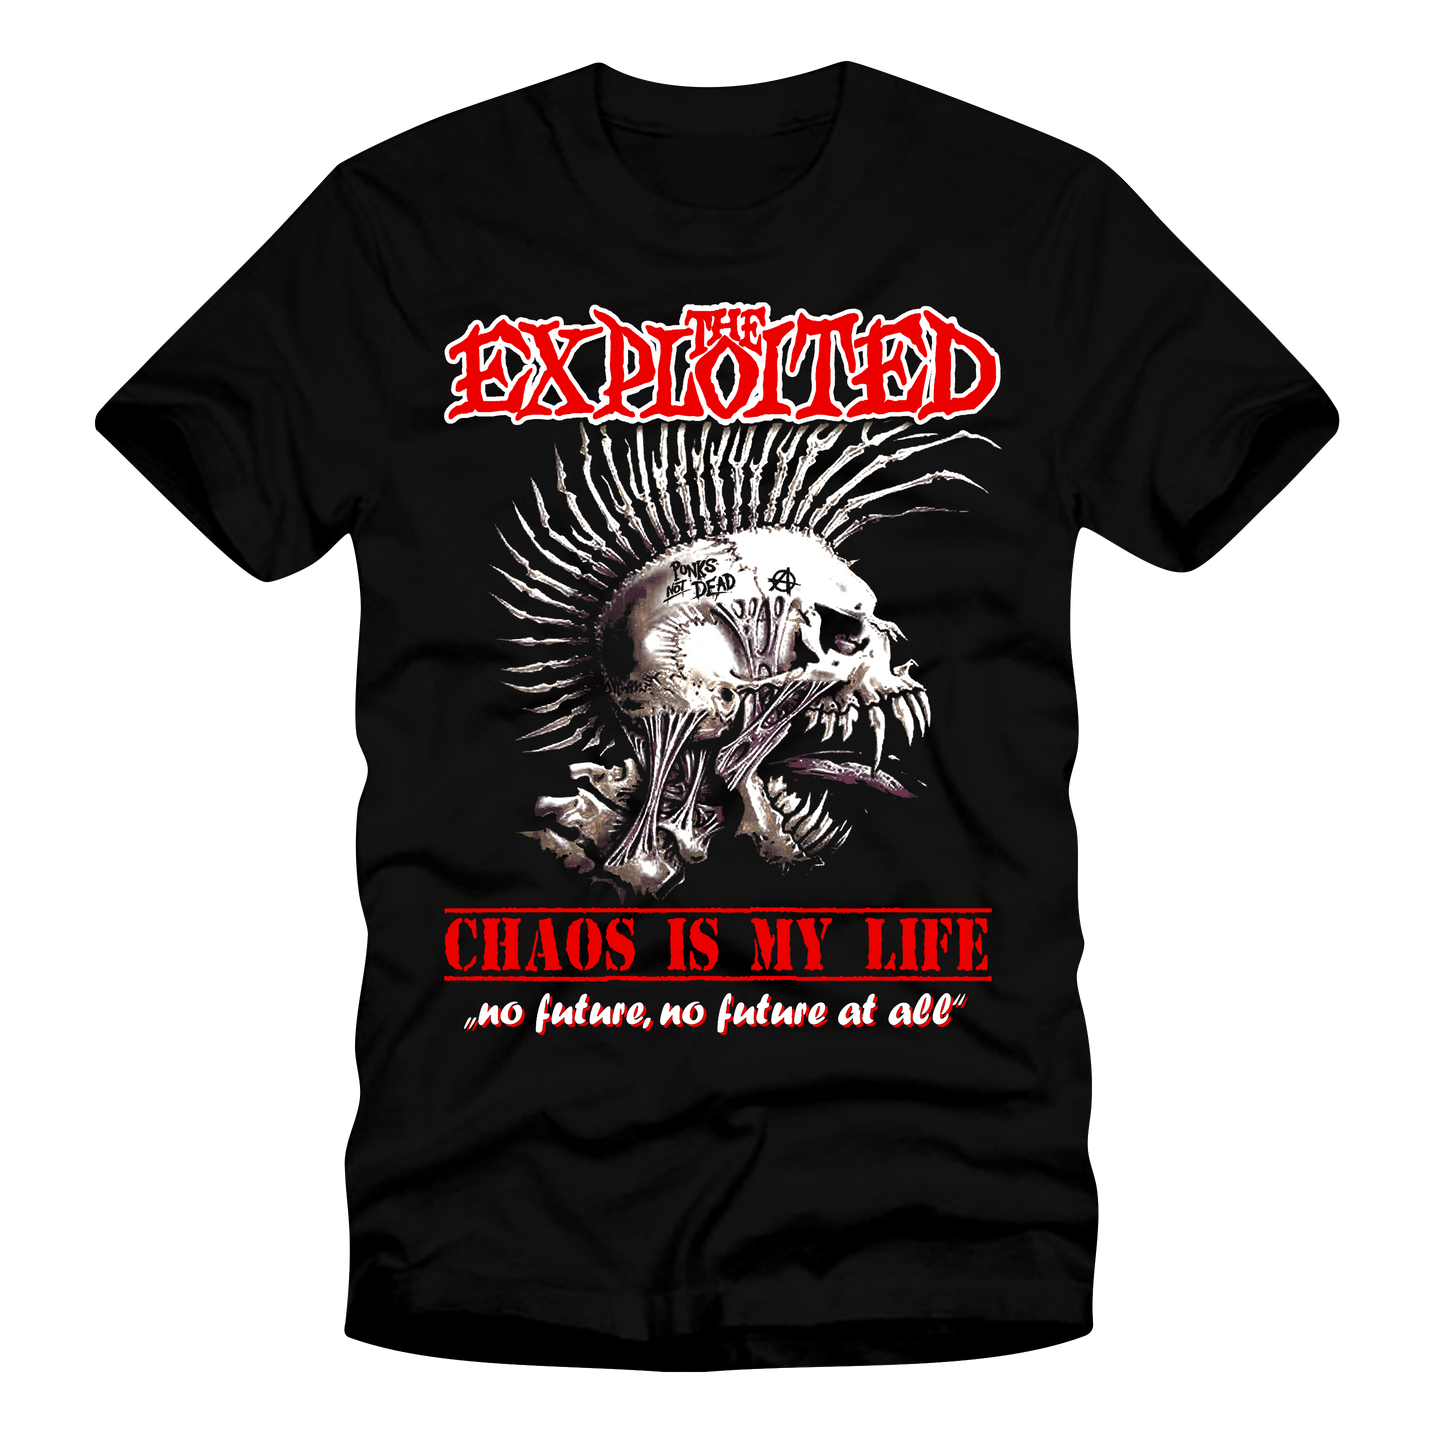 The Exploited - Chaos Is My Life T Shirt